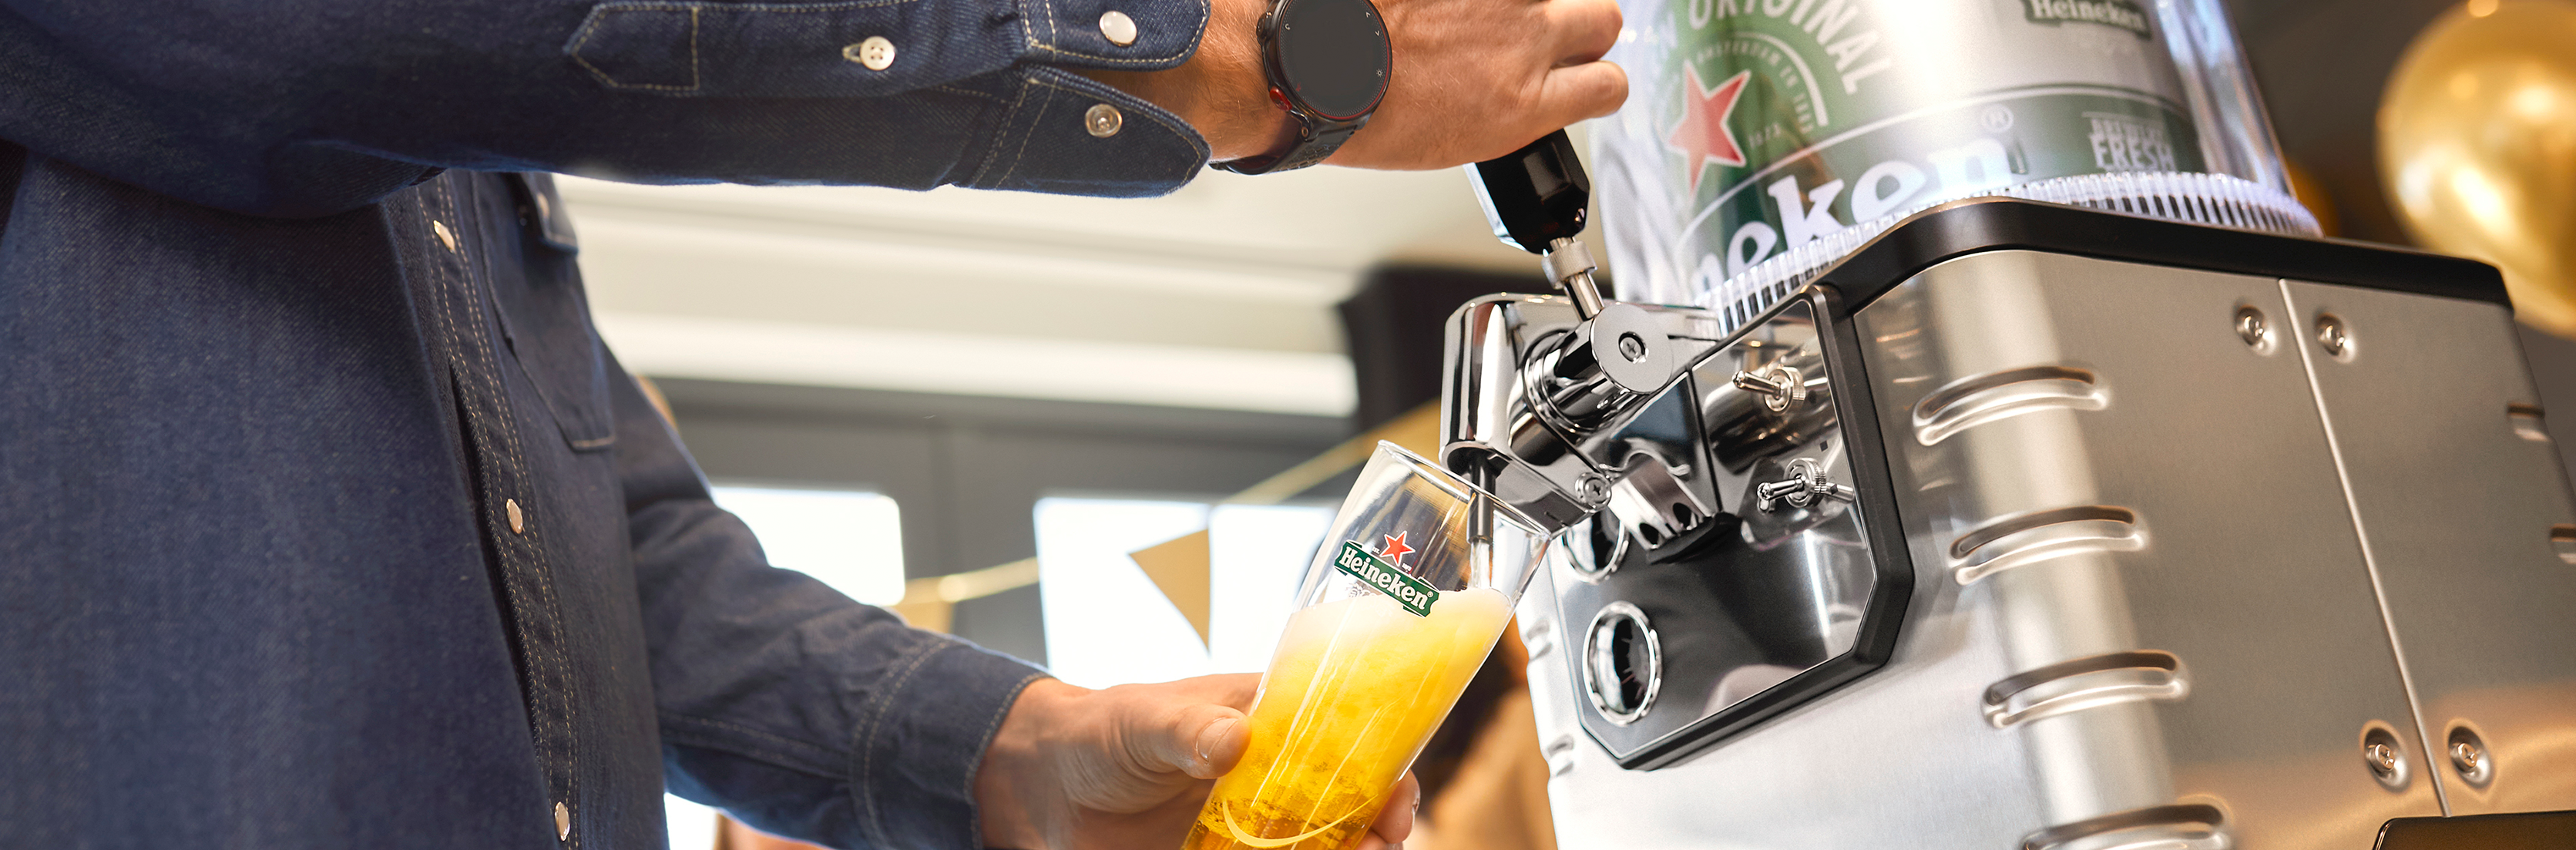 Have Your Own Heineken® Bar at Home with BLADE